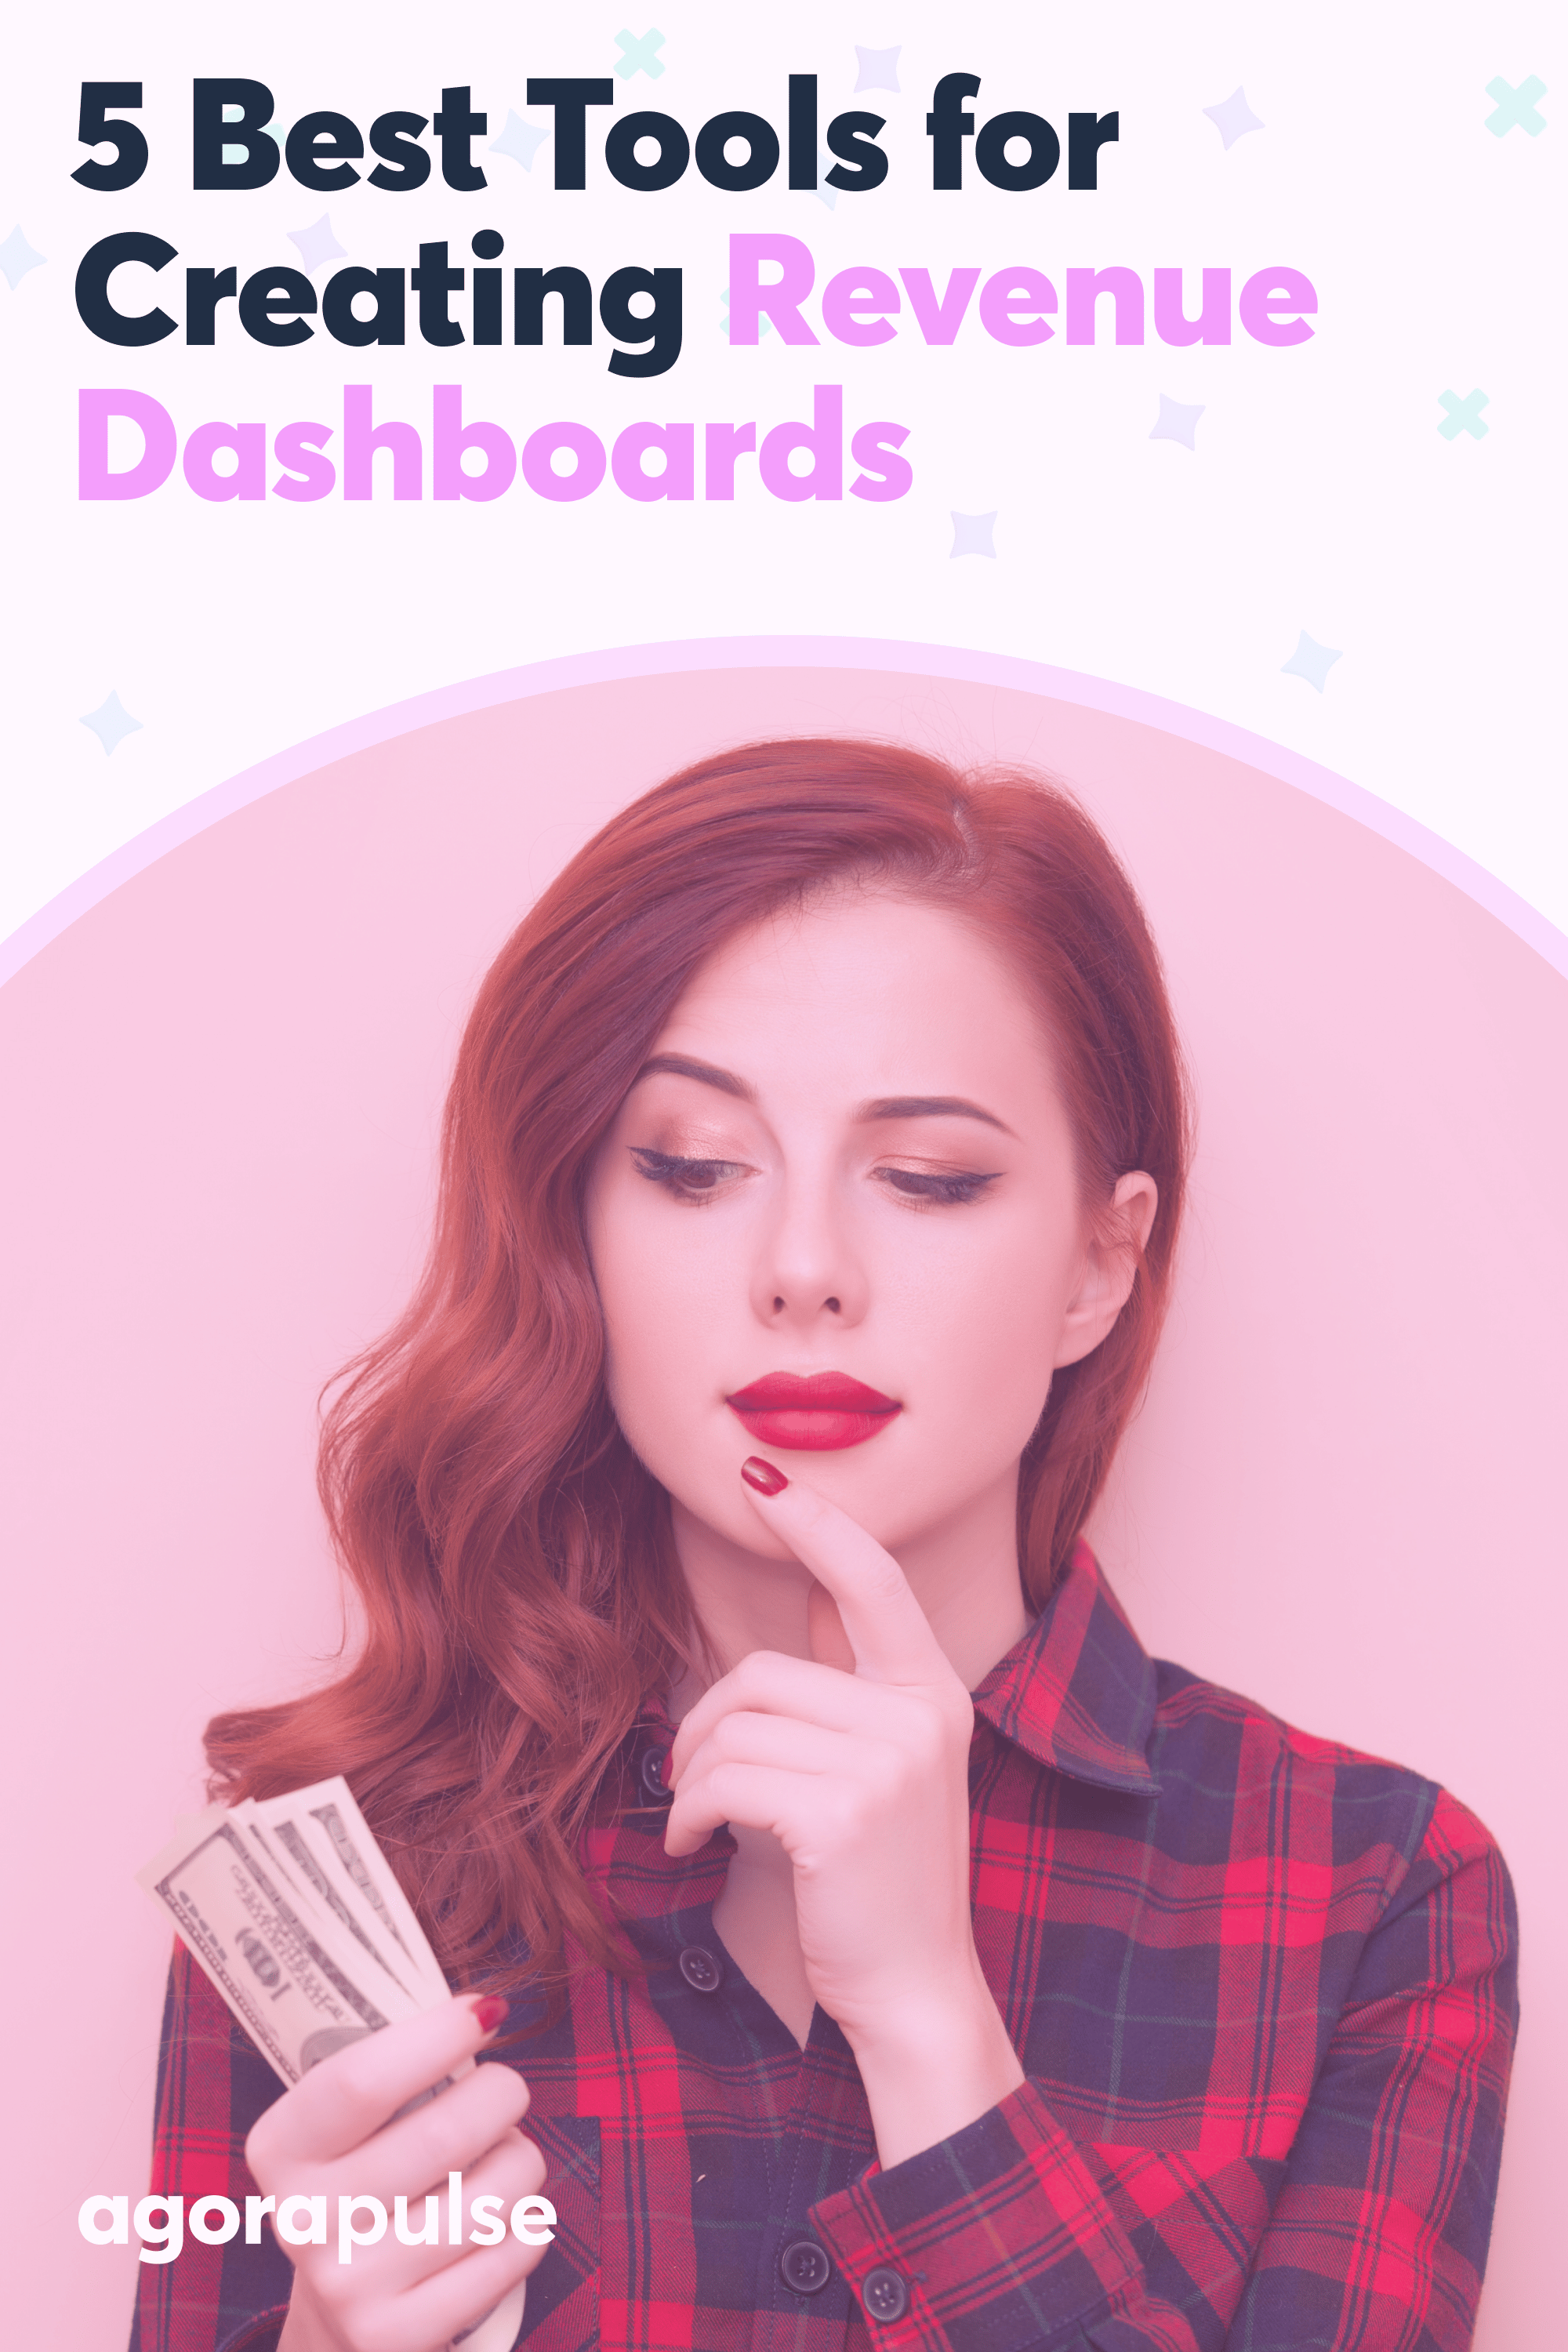 5 Best Tools for Creating Revenue Dashboards